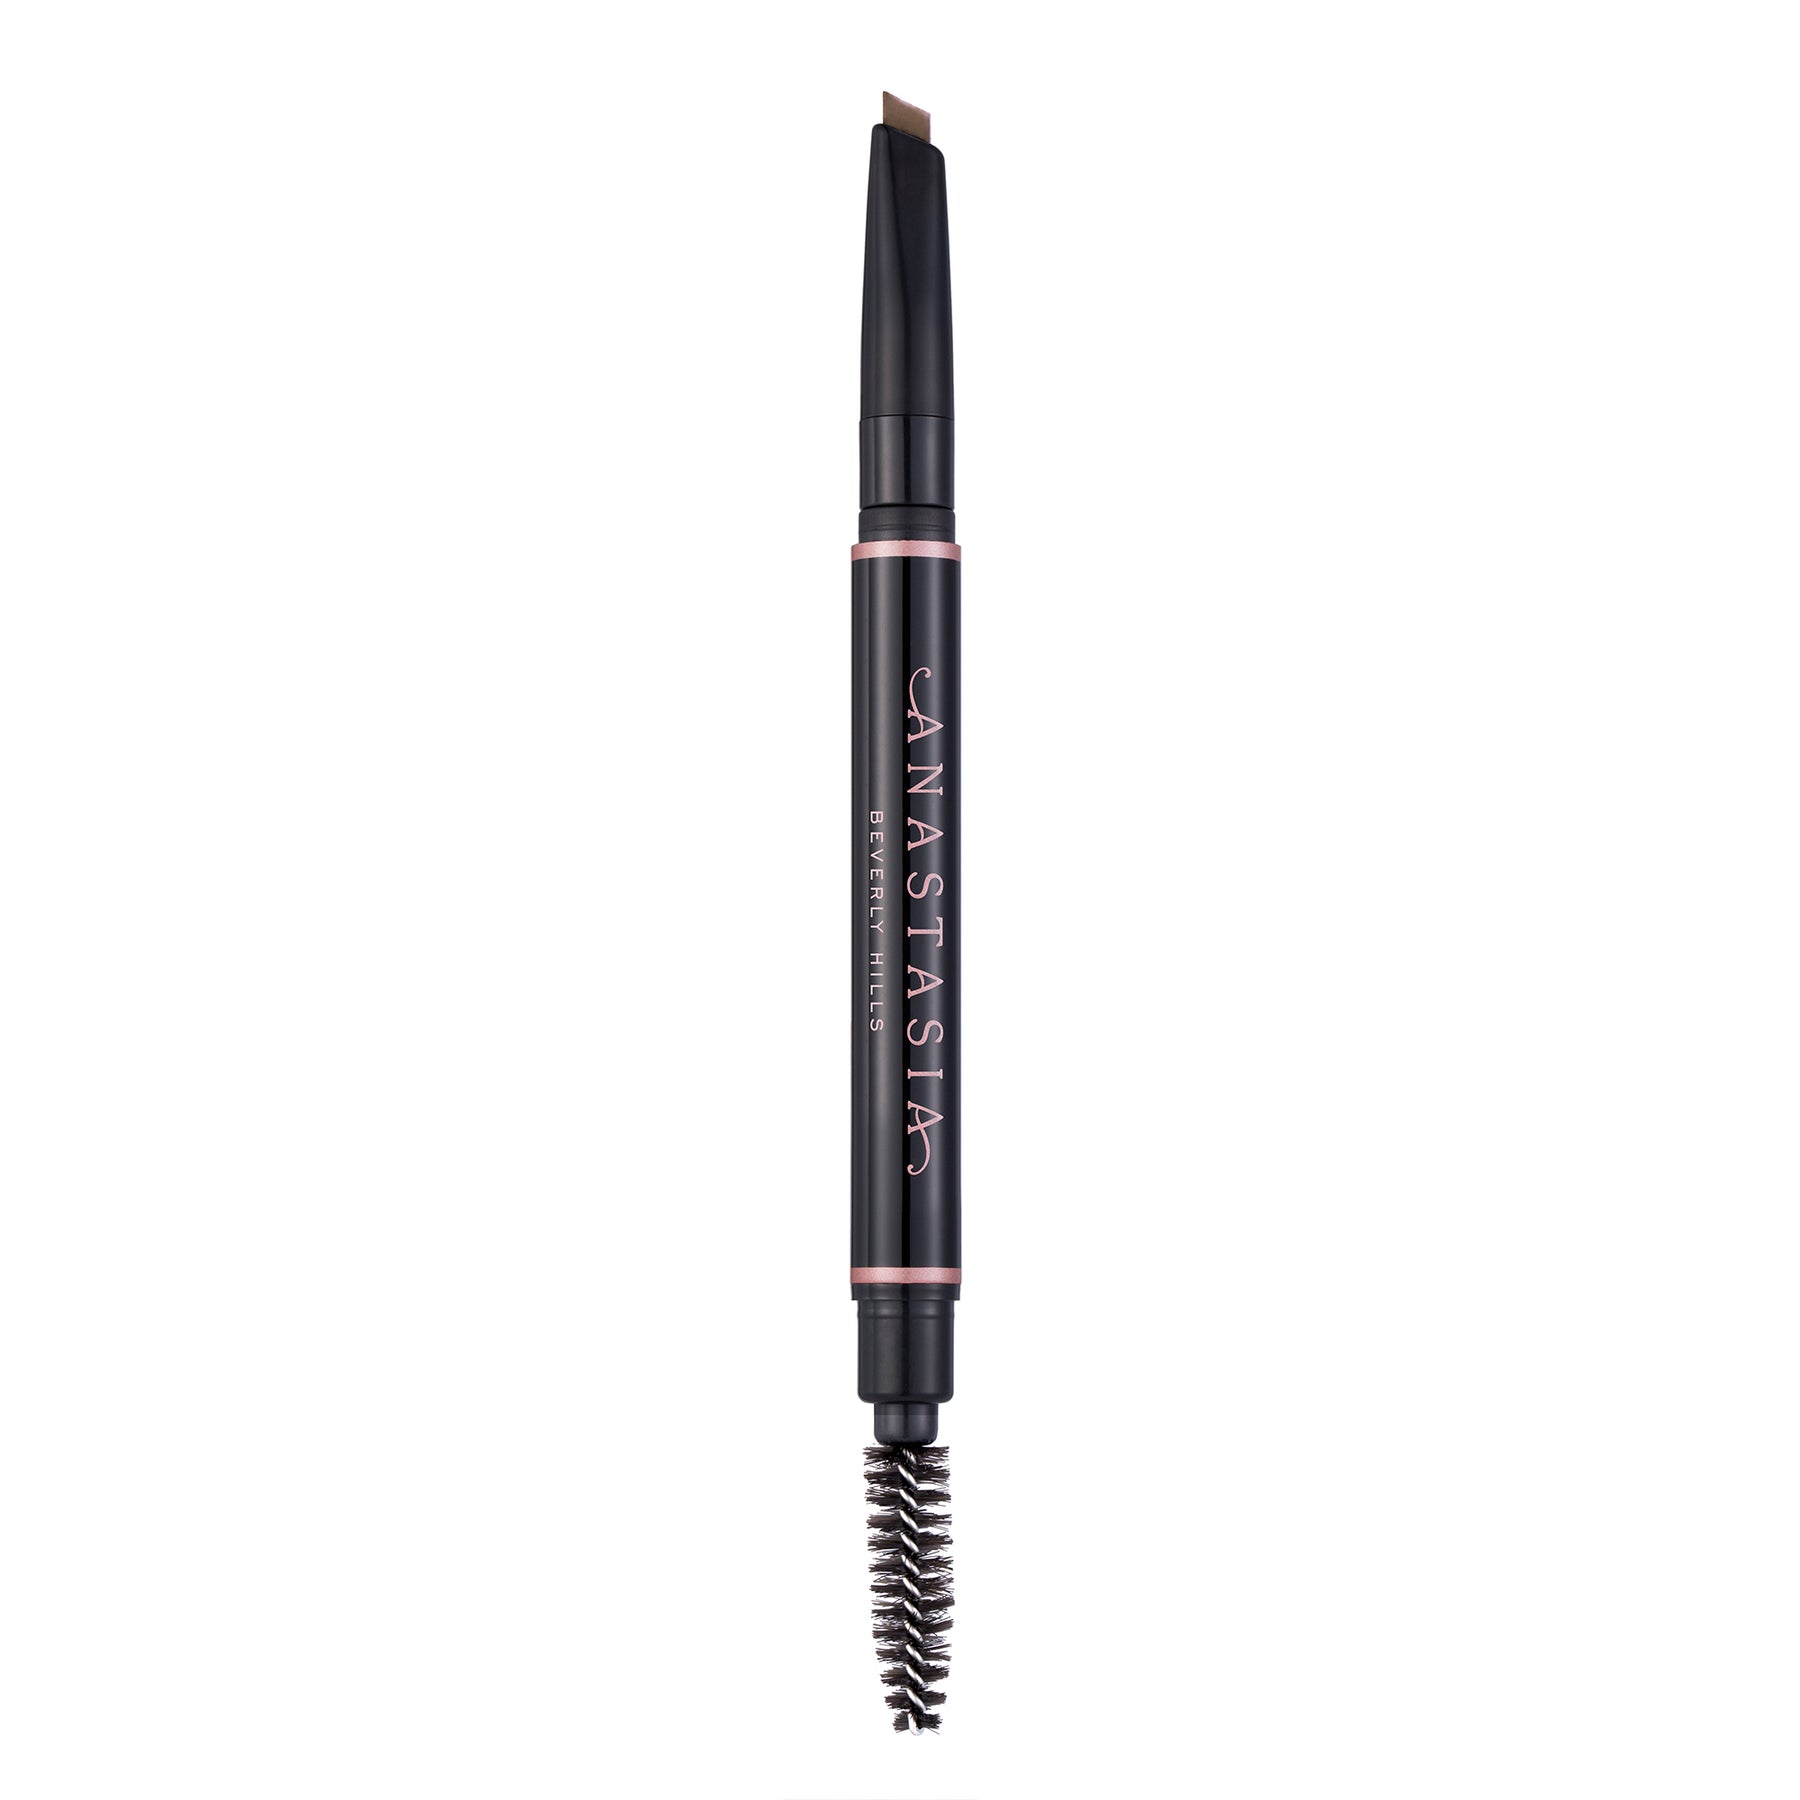 Hills Beauty The – Anastasia Editor Definer Brow Beverly